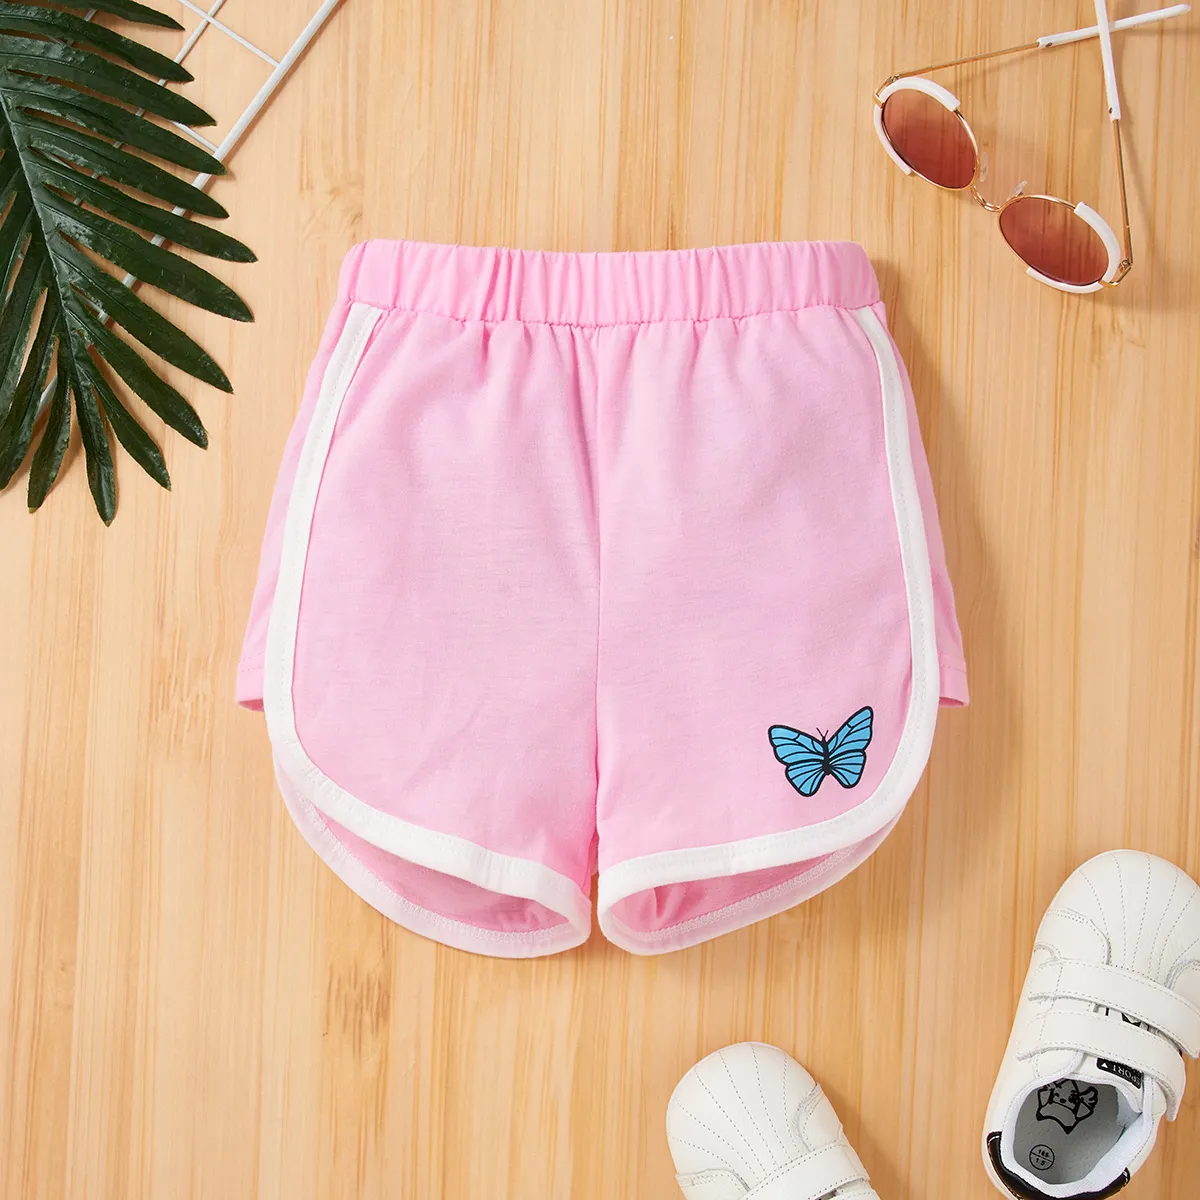 Toddler Girl Butterfly Print Shorts Pink big image 1